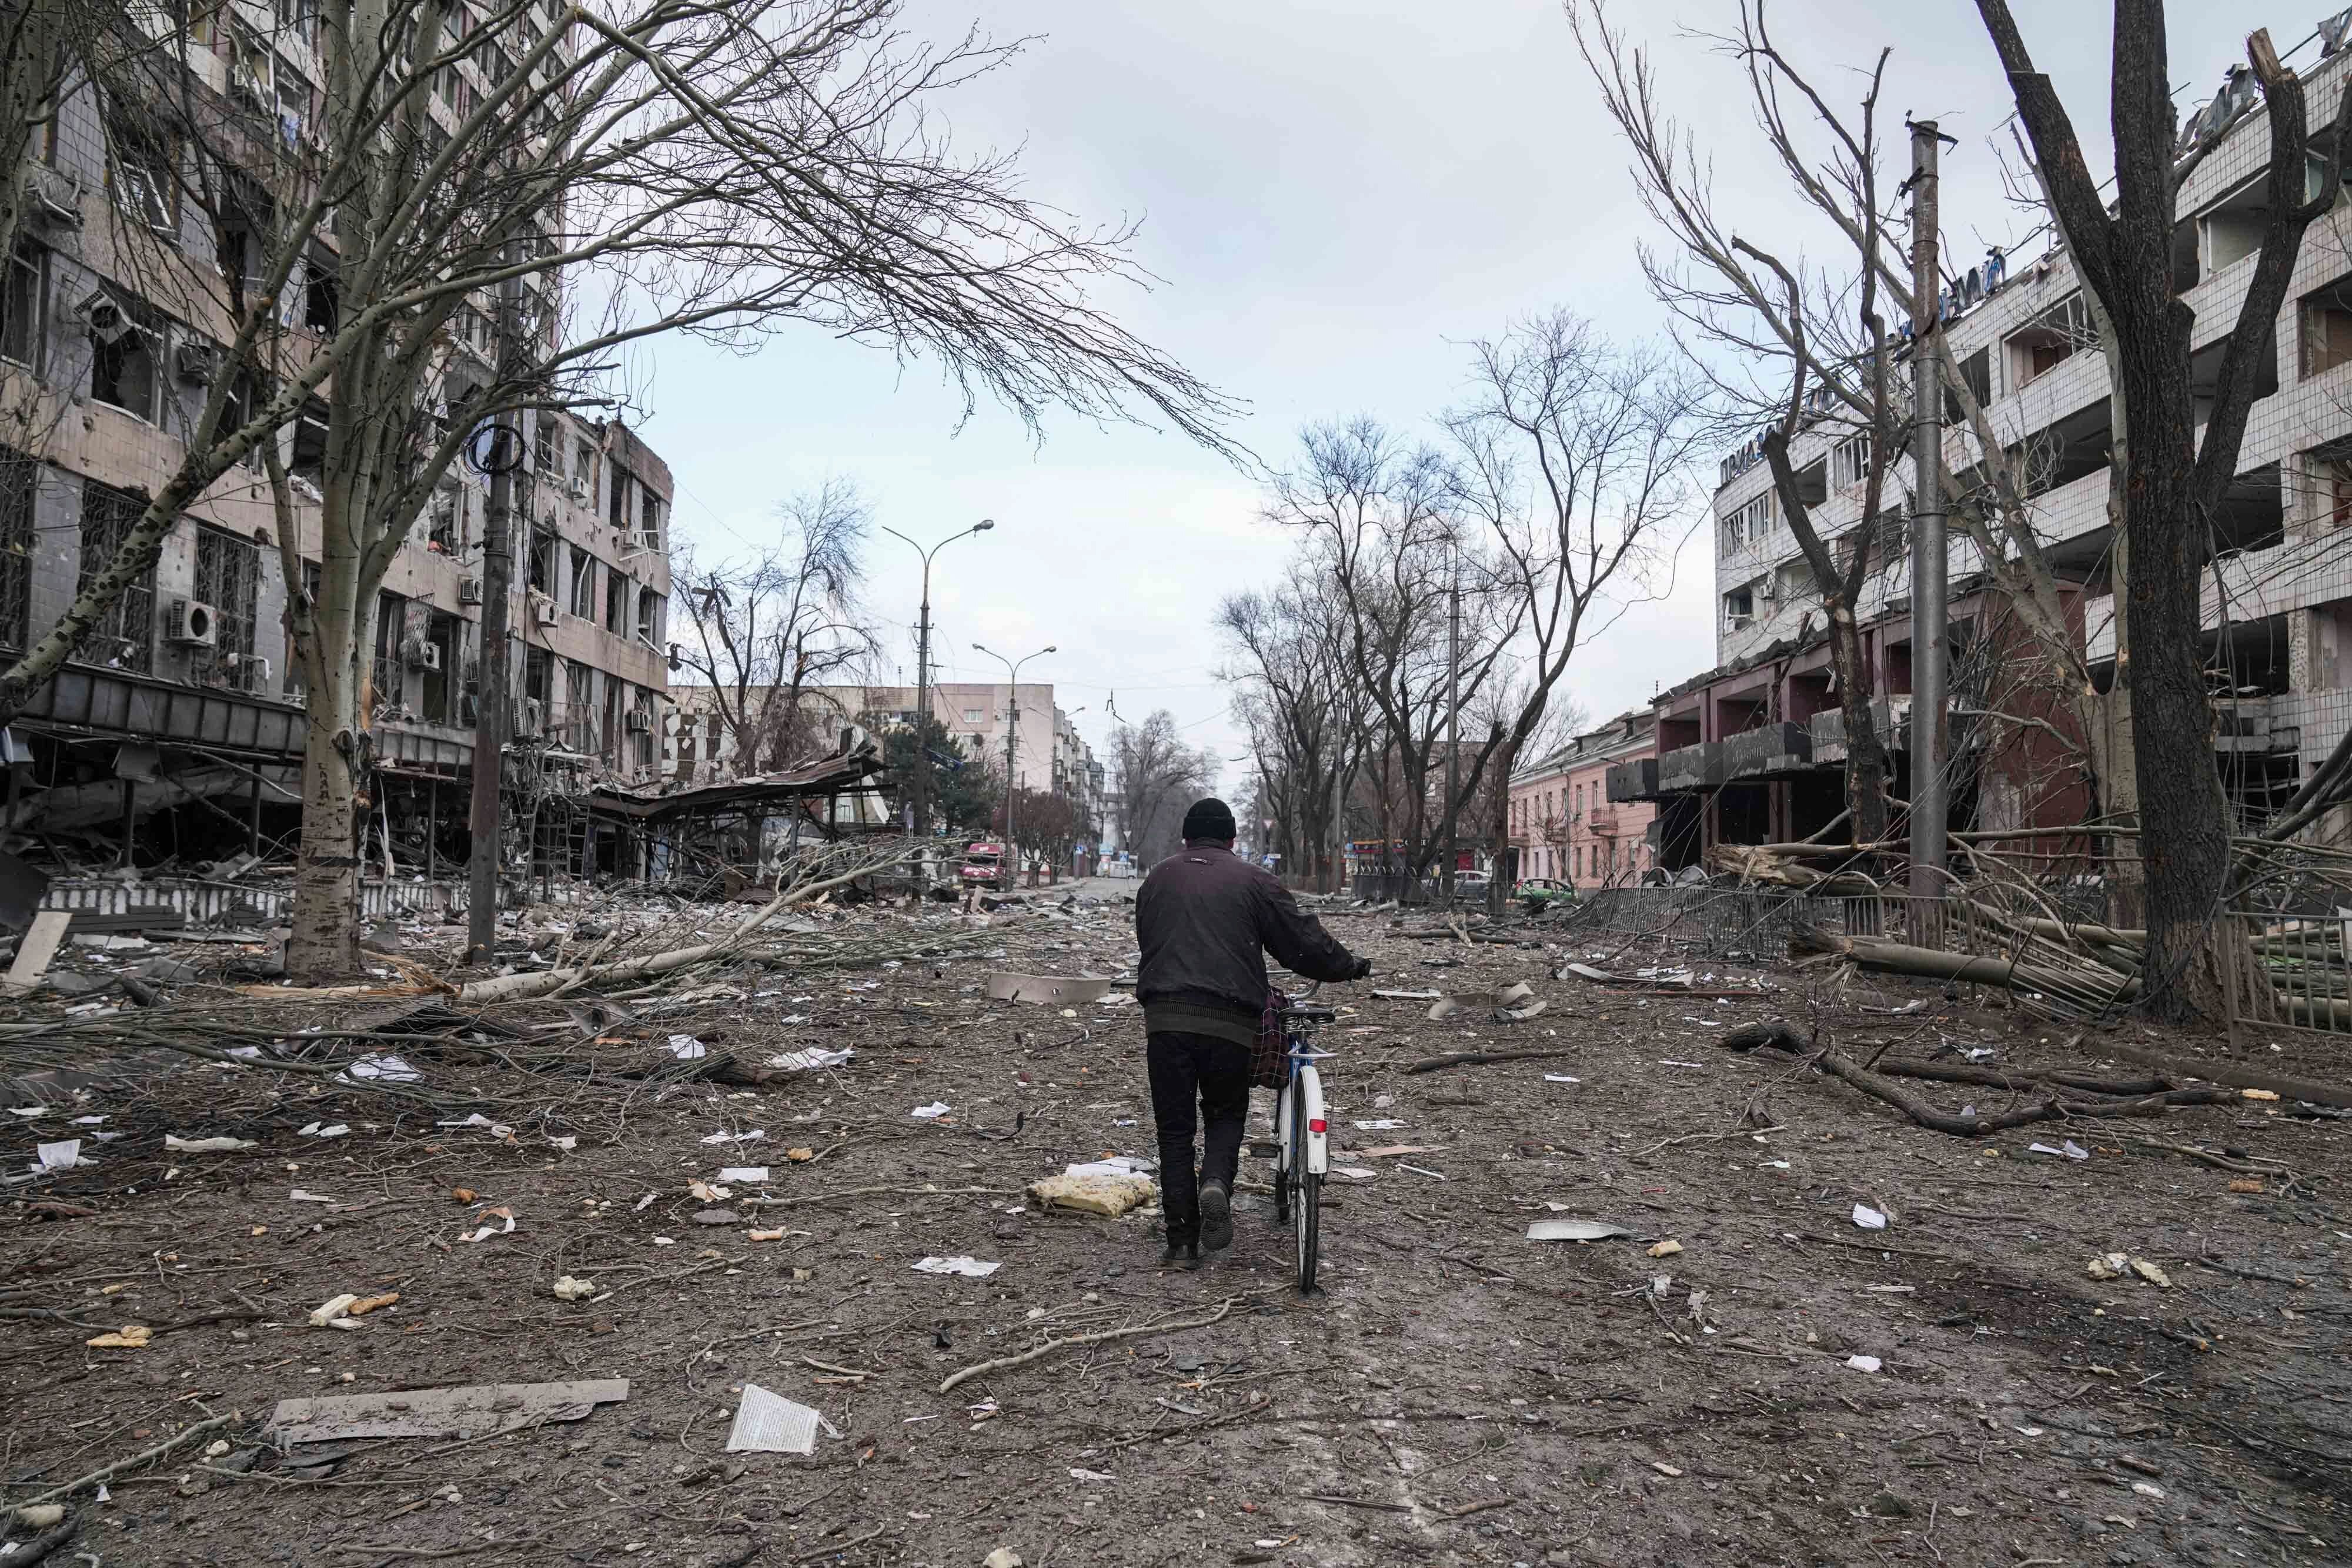 A man walks with a bicycle in a street damaged by shelling in Mariupol, Ukraine, on Thursday